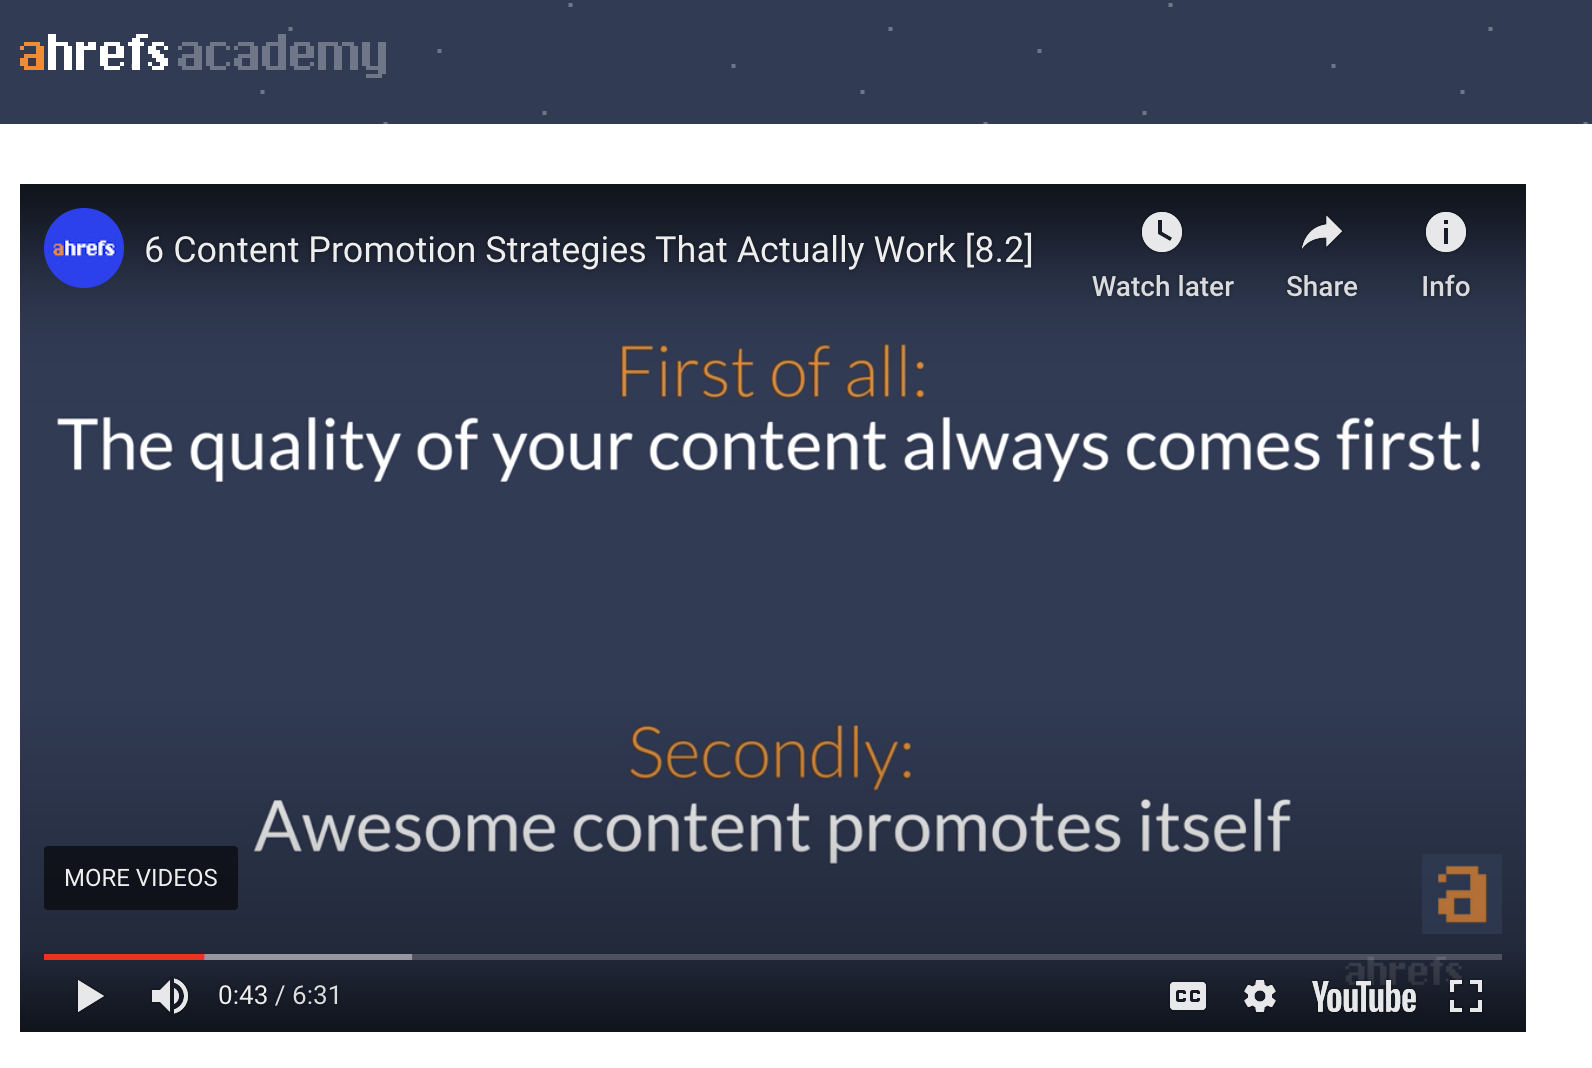 ahrefs academy content marketing course promotion